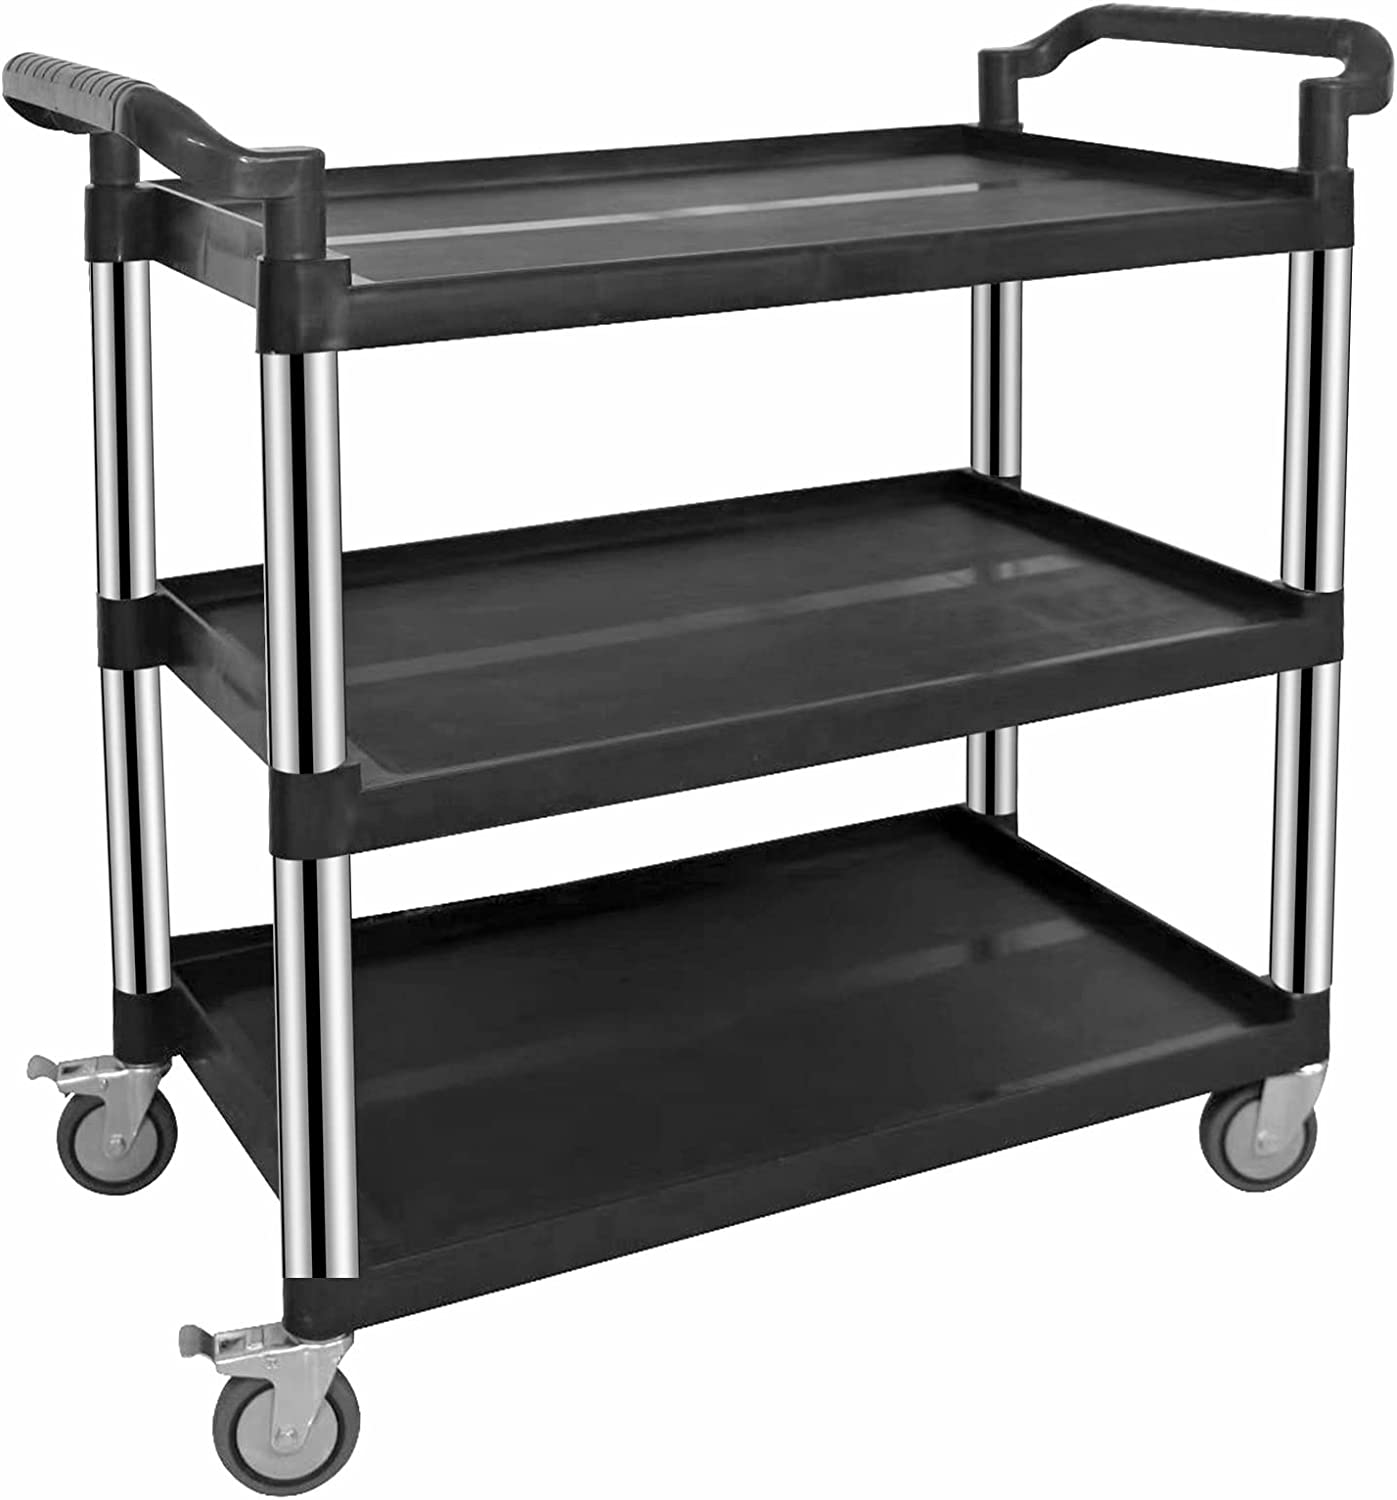 UNICOO Plastic Heavy Duty Utility Cart-550 Pound, 3-Tier Service Cart, Restaurant Cart with Wheels Lockable 41X19.5X 39 inches - Large Size